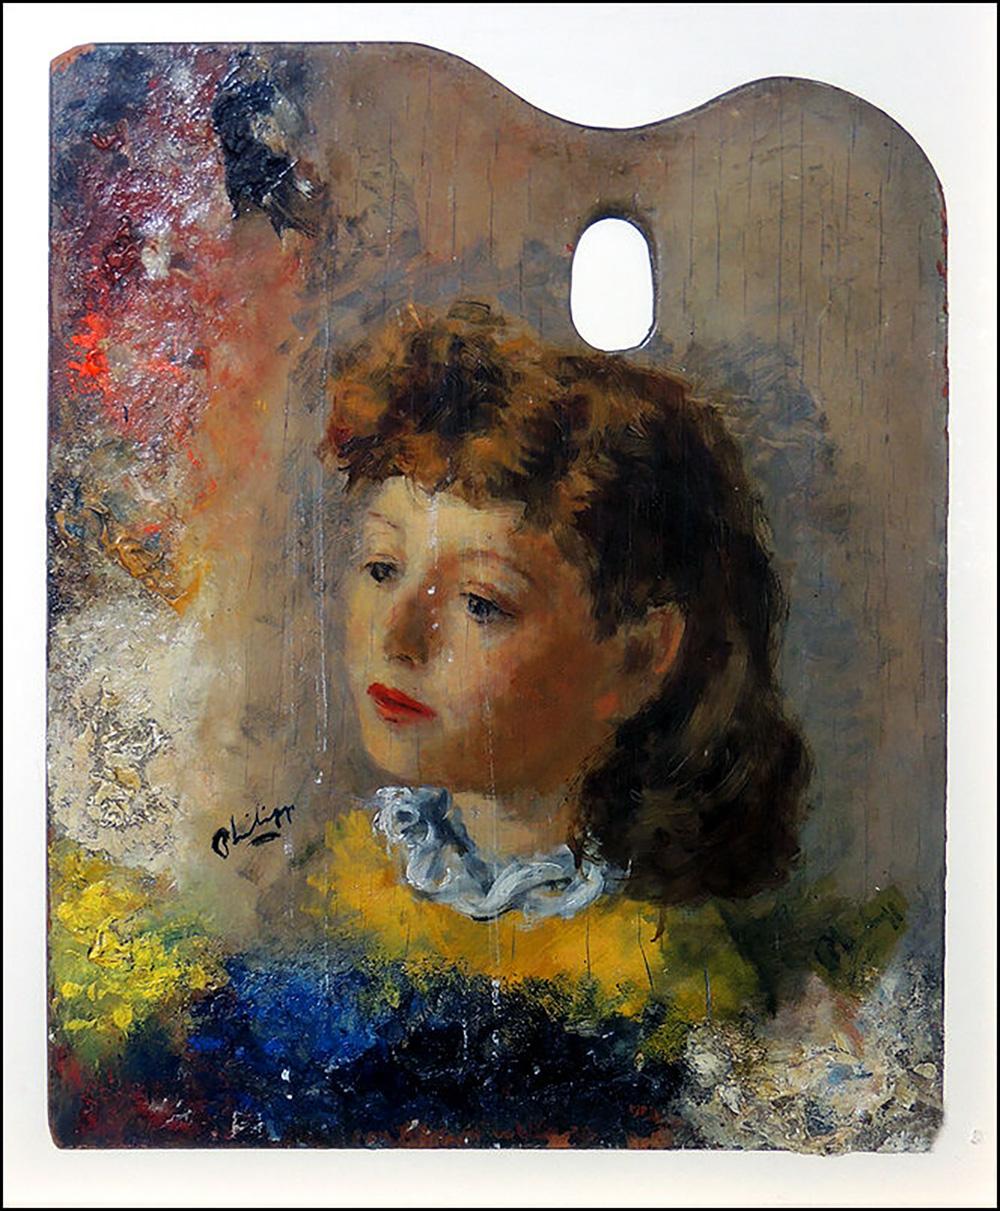 Robert Philipp Authentic and Original Oil Painting the Artist's Wood Palette, Custom Framed and listed with the Submit Best Offer option


Accepting Offers Now: The item up for sale is an Original Oil PAINTING by Philipp on his wood palette of an